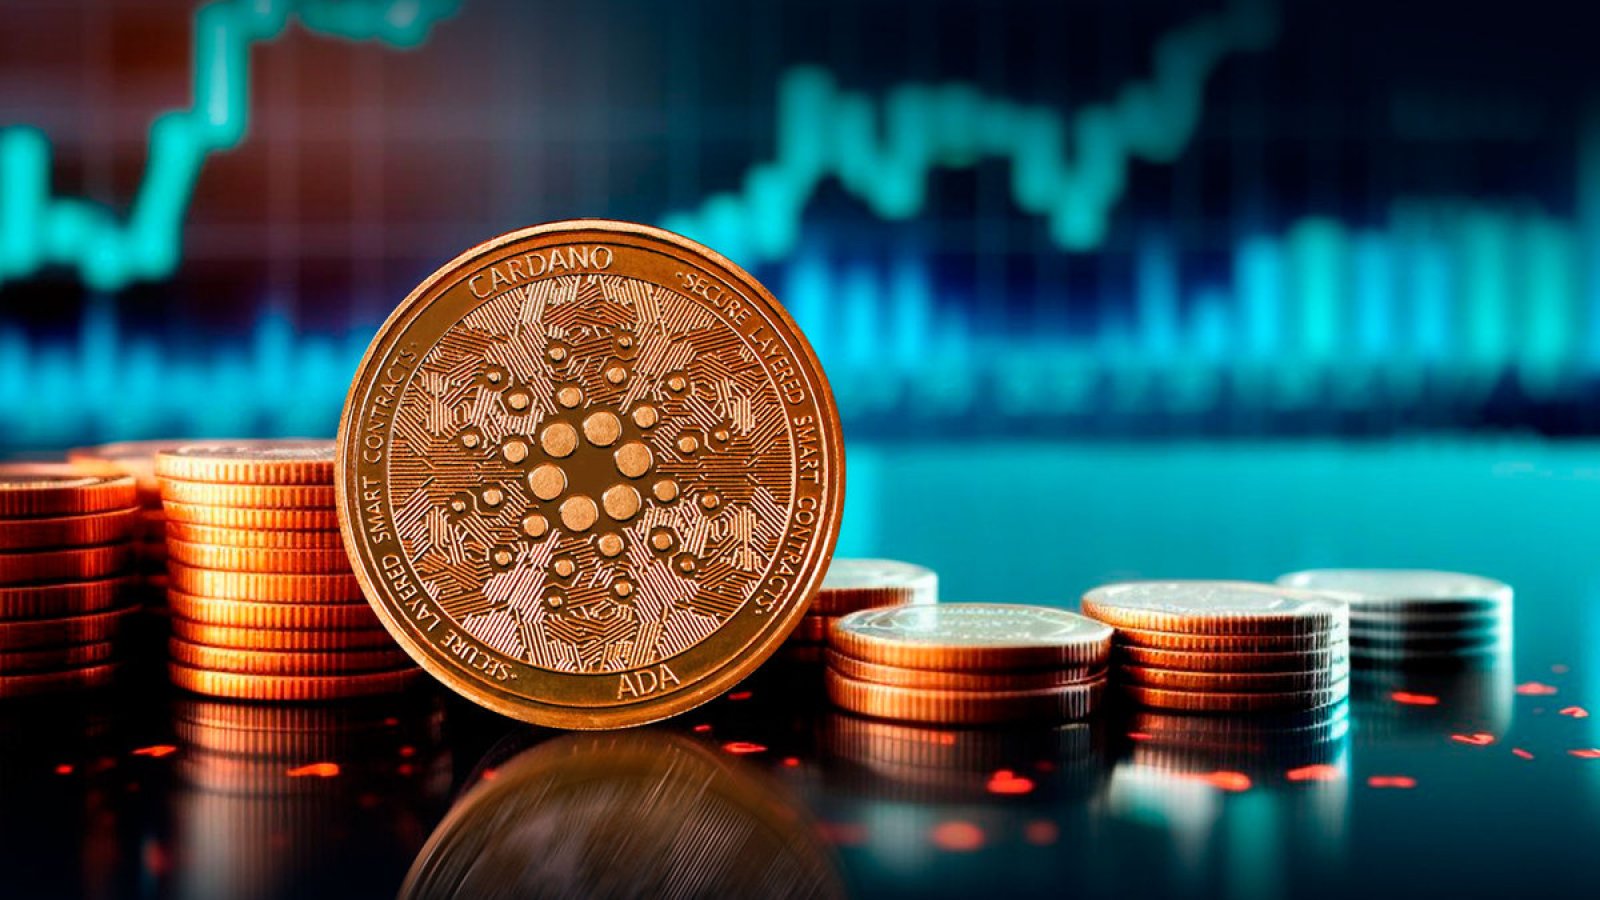 Cardano (ADA) Price Targets Multi-Month Highs Right Now, Here's Why